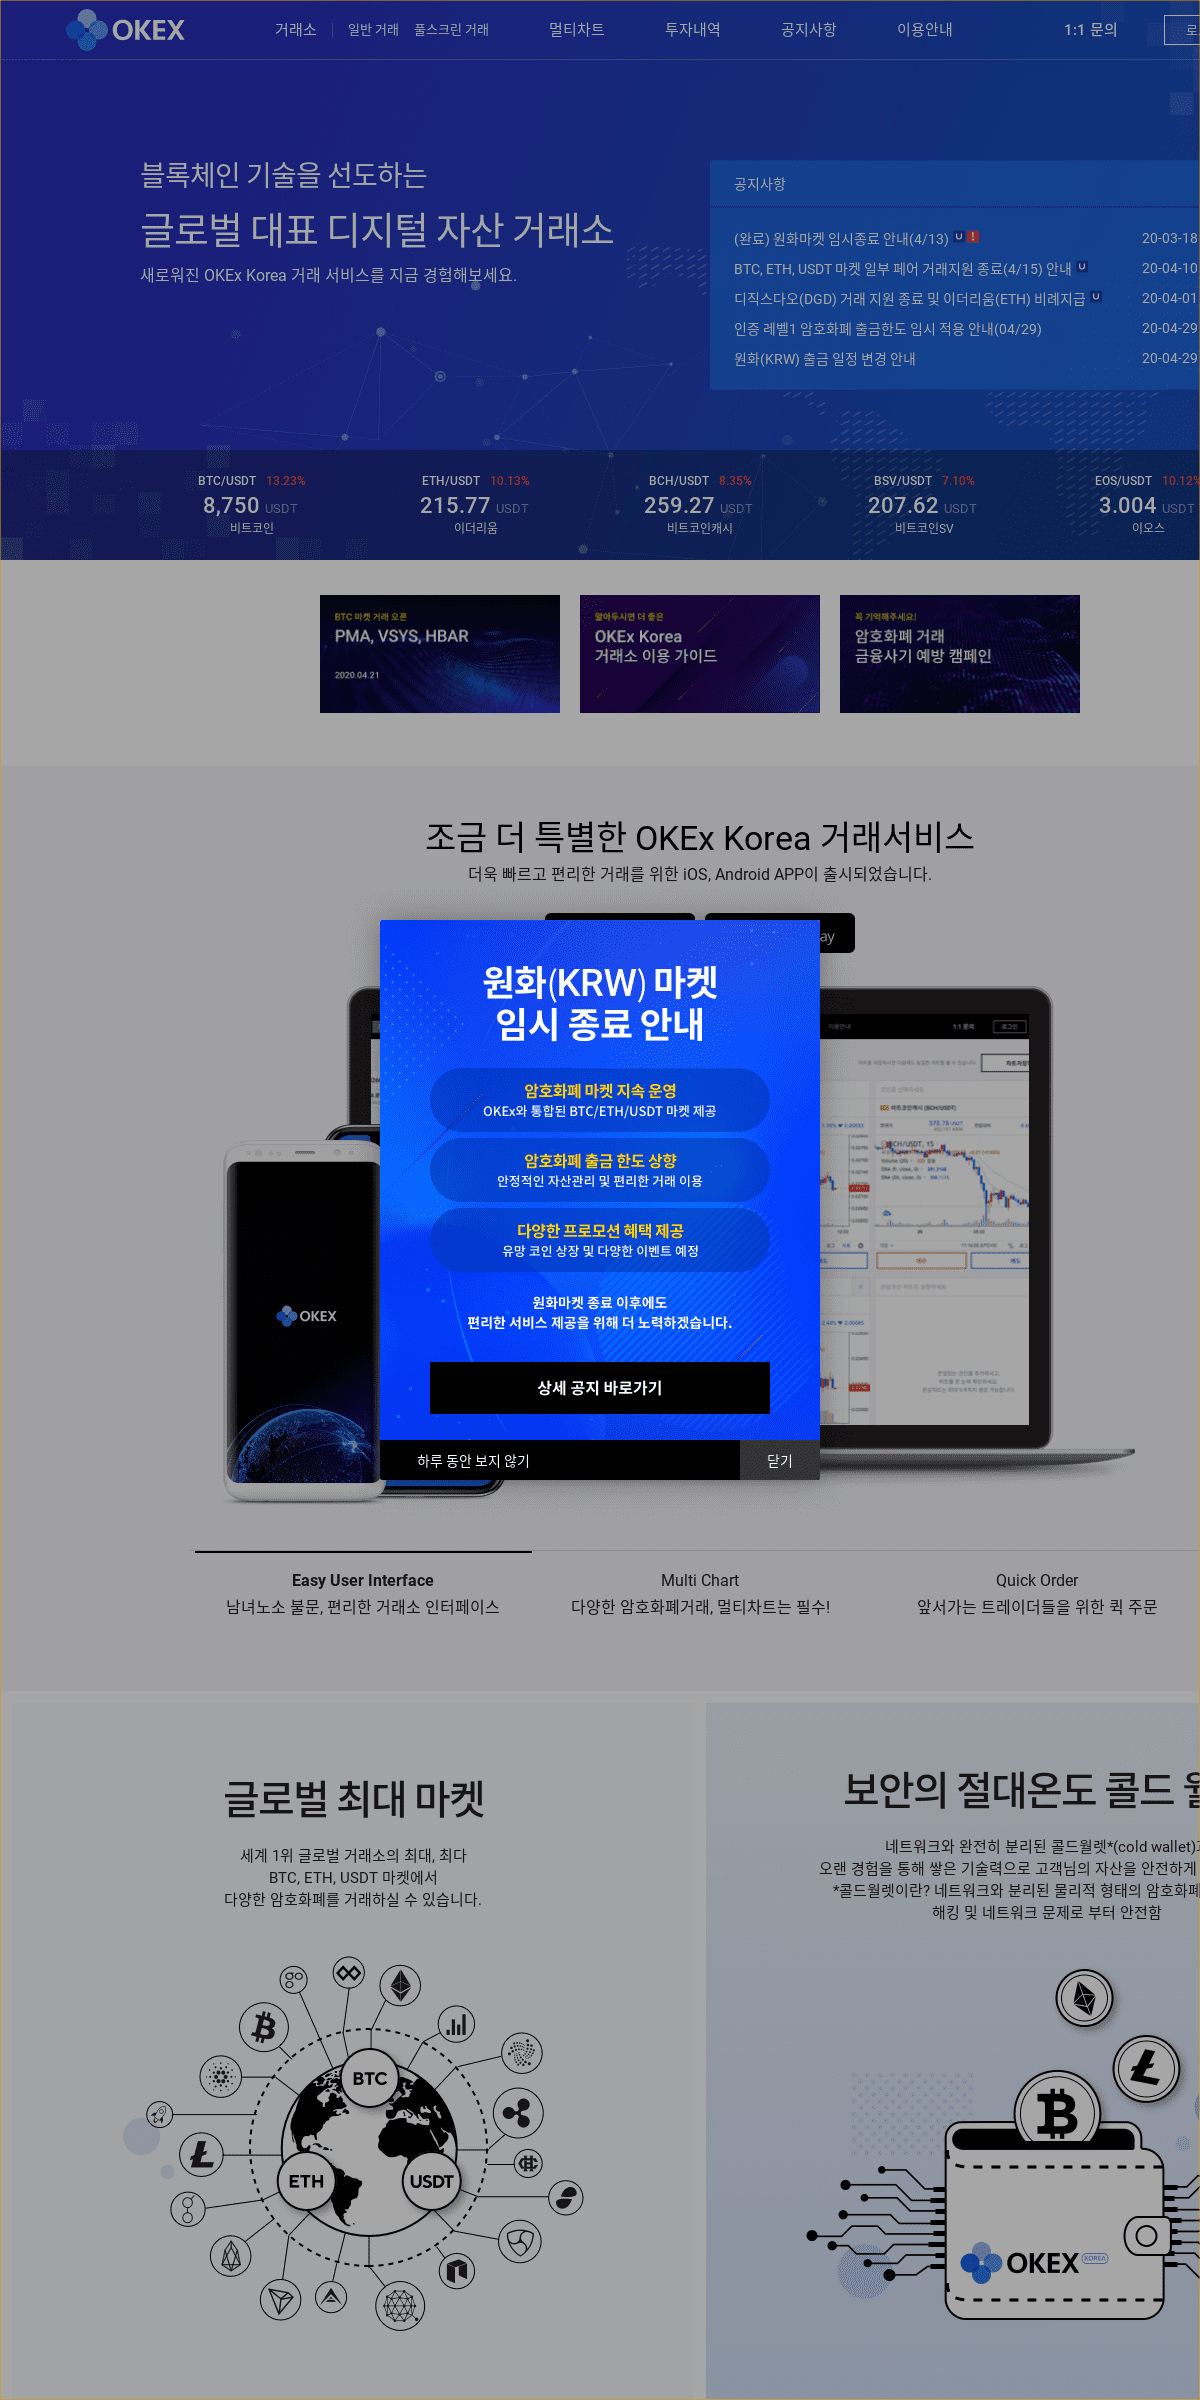 A complete backup of okex.co.kr